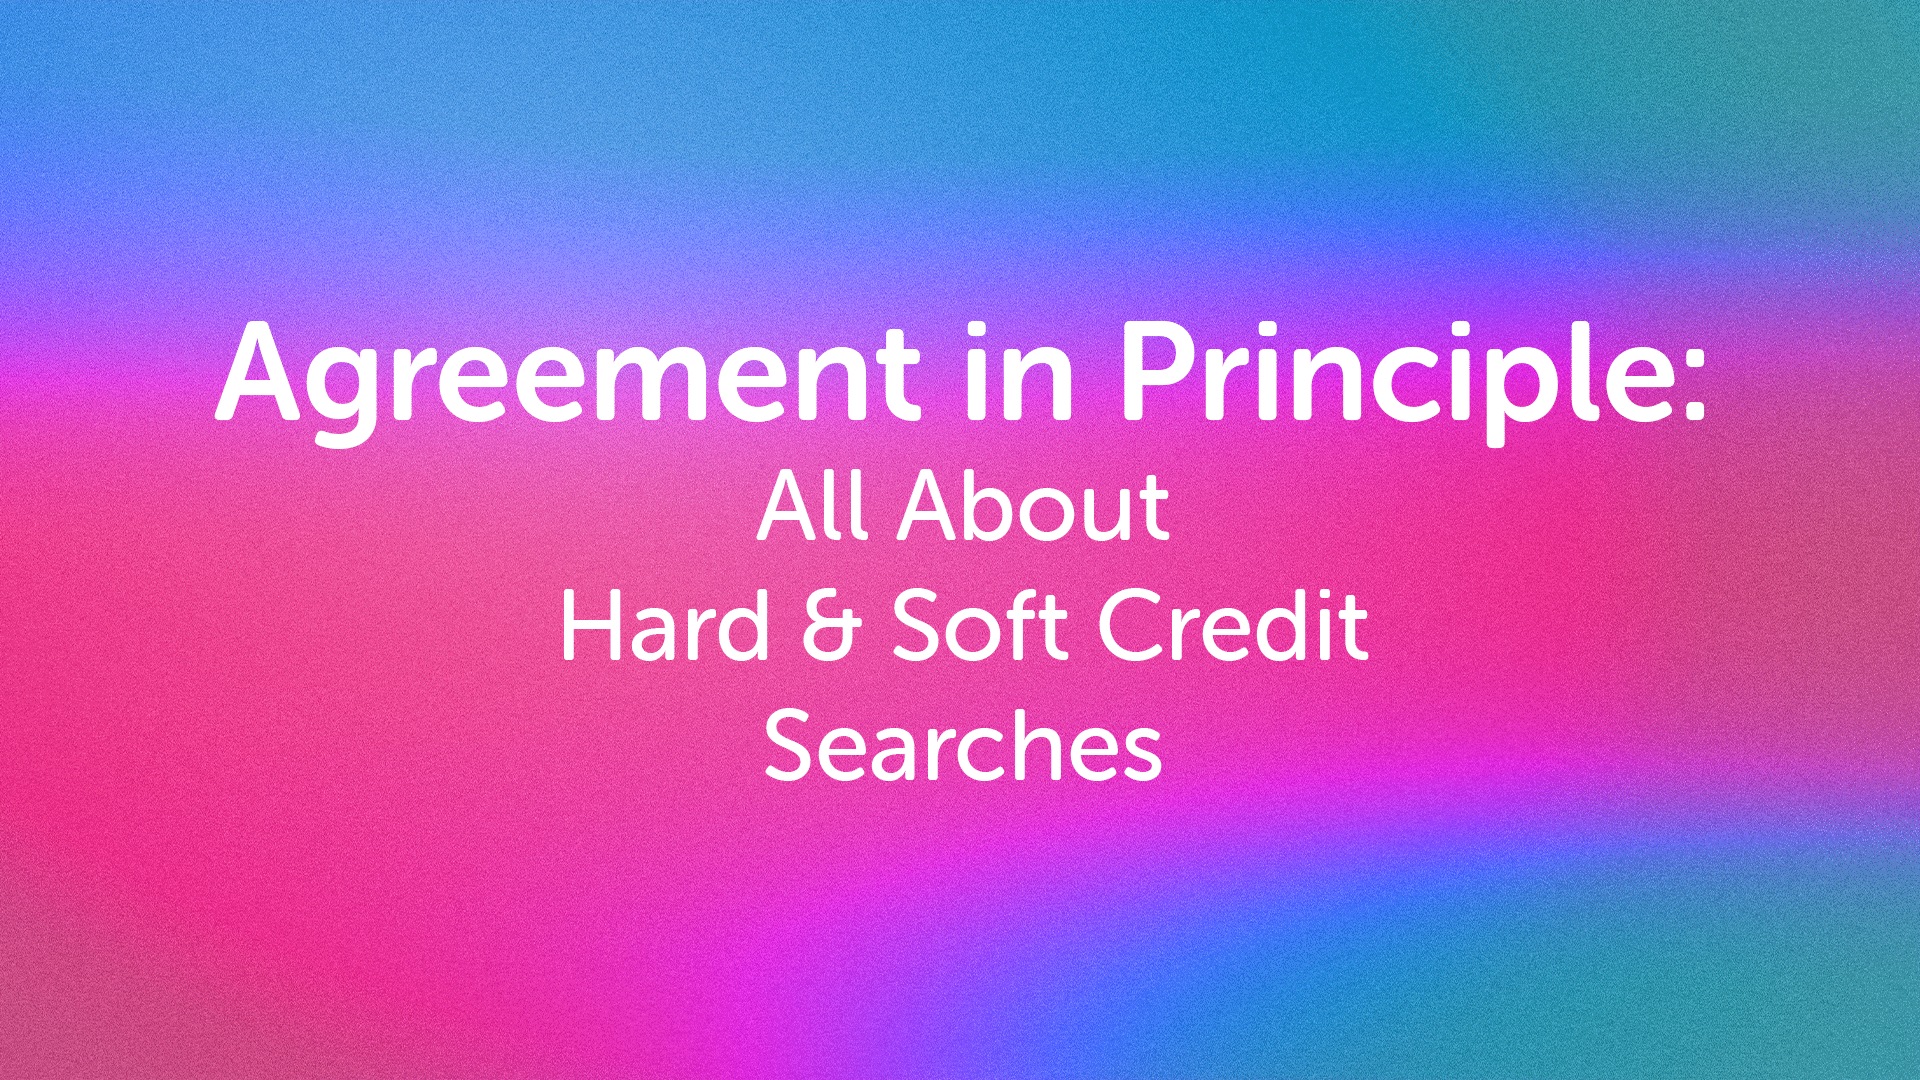 Agreement in Principle and Soft Credit Searches in Liverpool